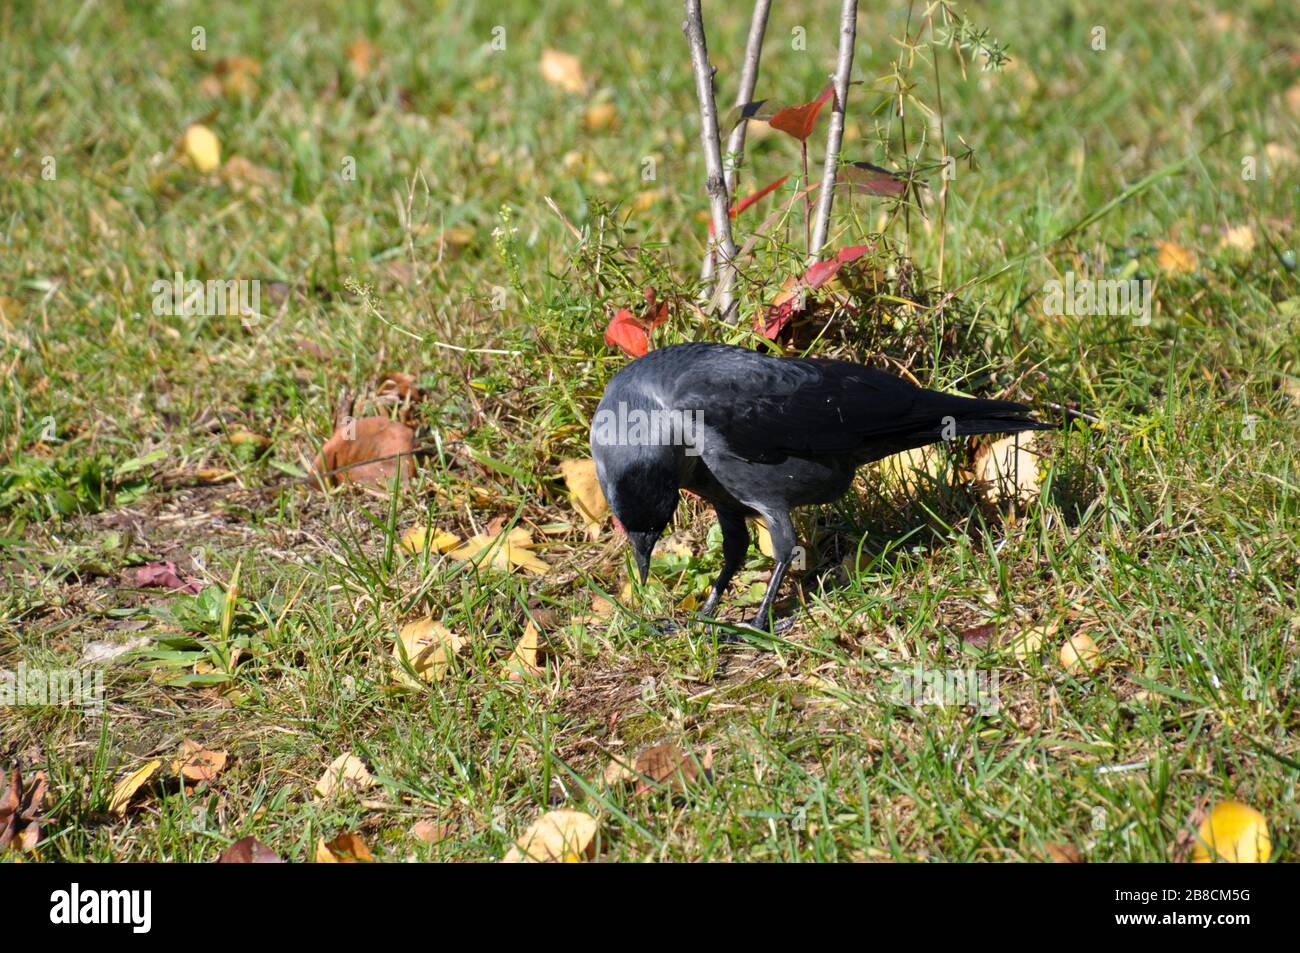 A jackdaw looks for food in grass. Closeup. Autumn. Stock Photo